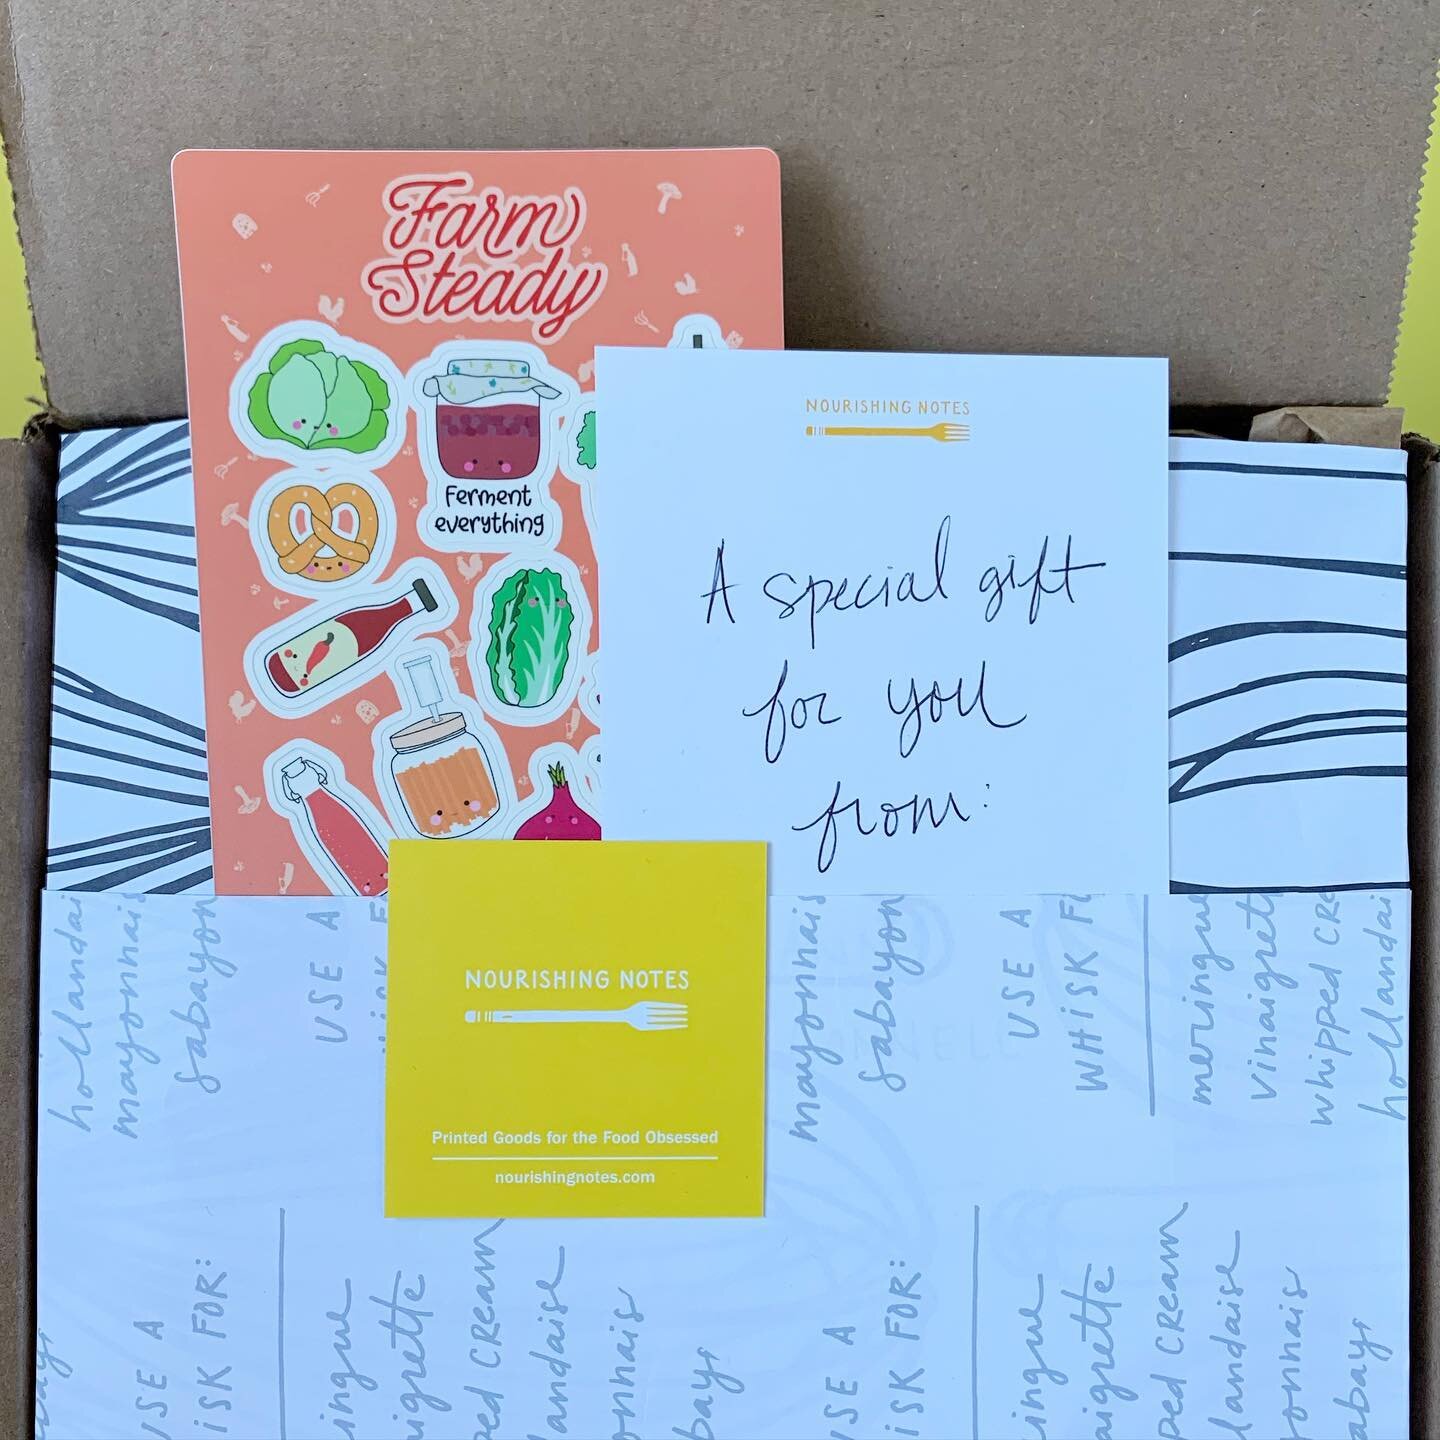 💛 I love packaging up gifts! With any purchase on our website, just leave me a note a check out if you&rsquo;d like gift wrapping and / or a note. As a special bonus, any orders that contain gifts from @farmsteady get a super fun sticker set! 💛